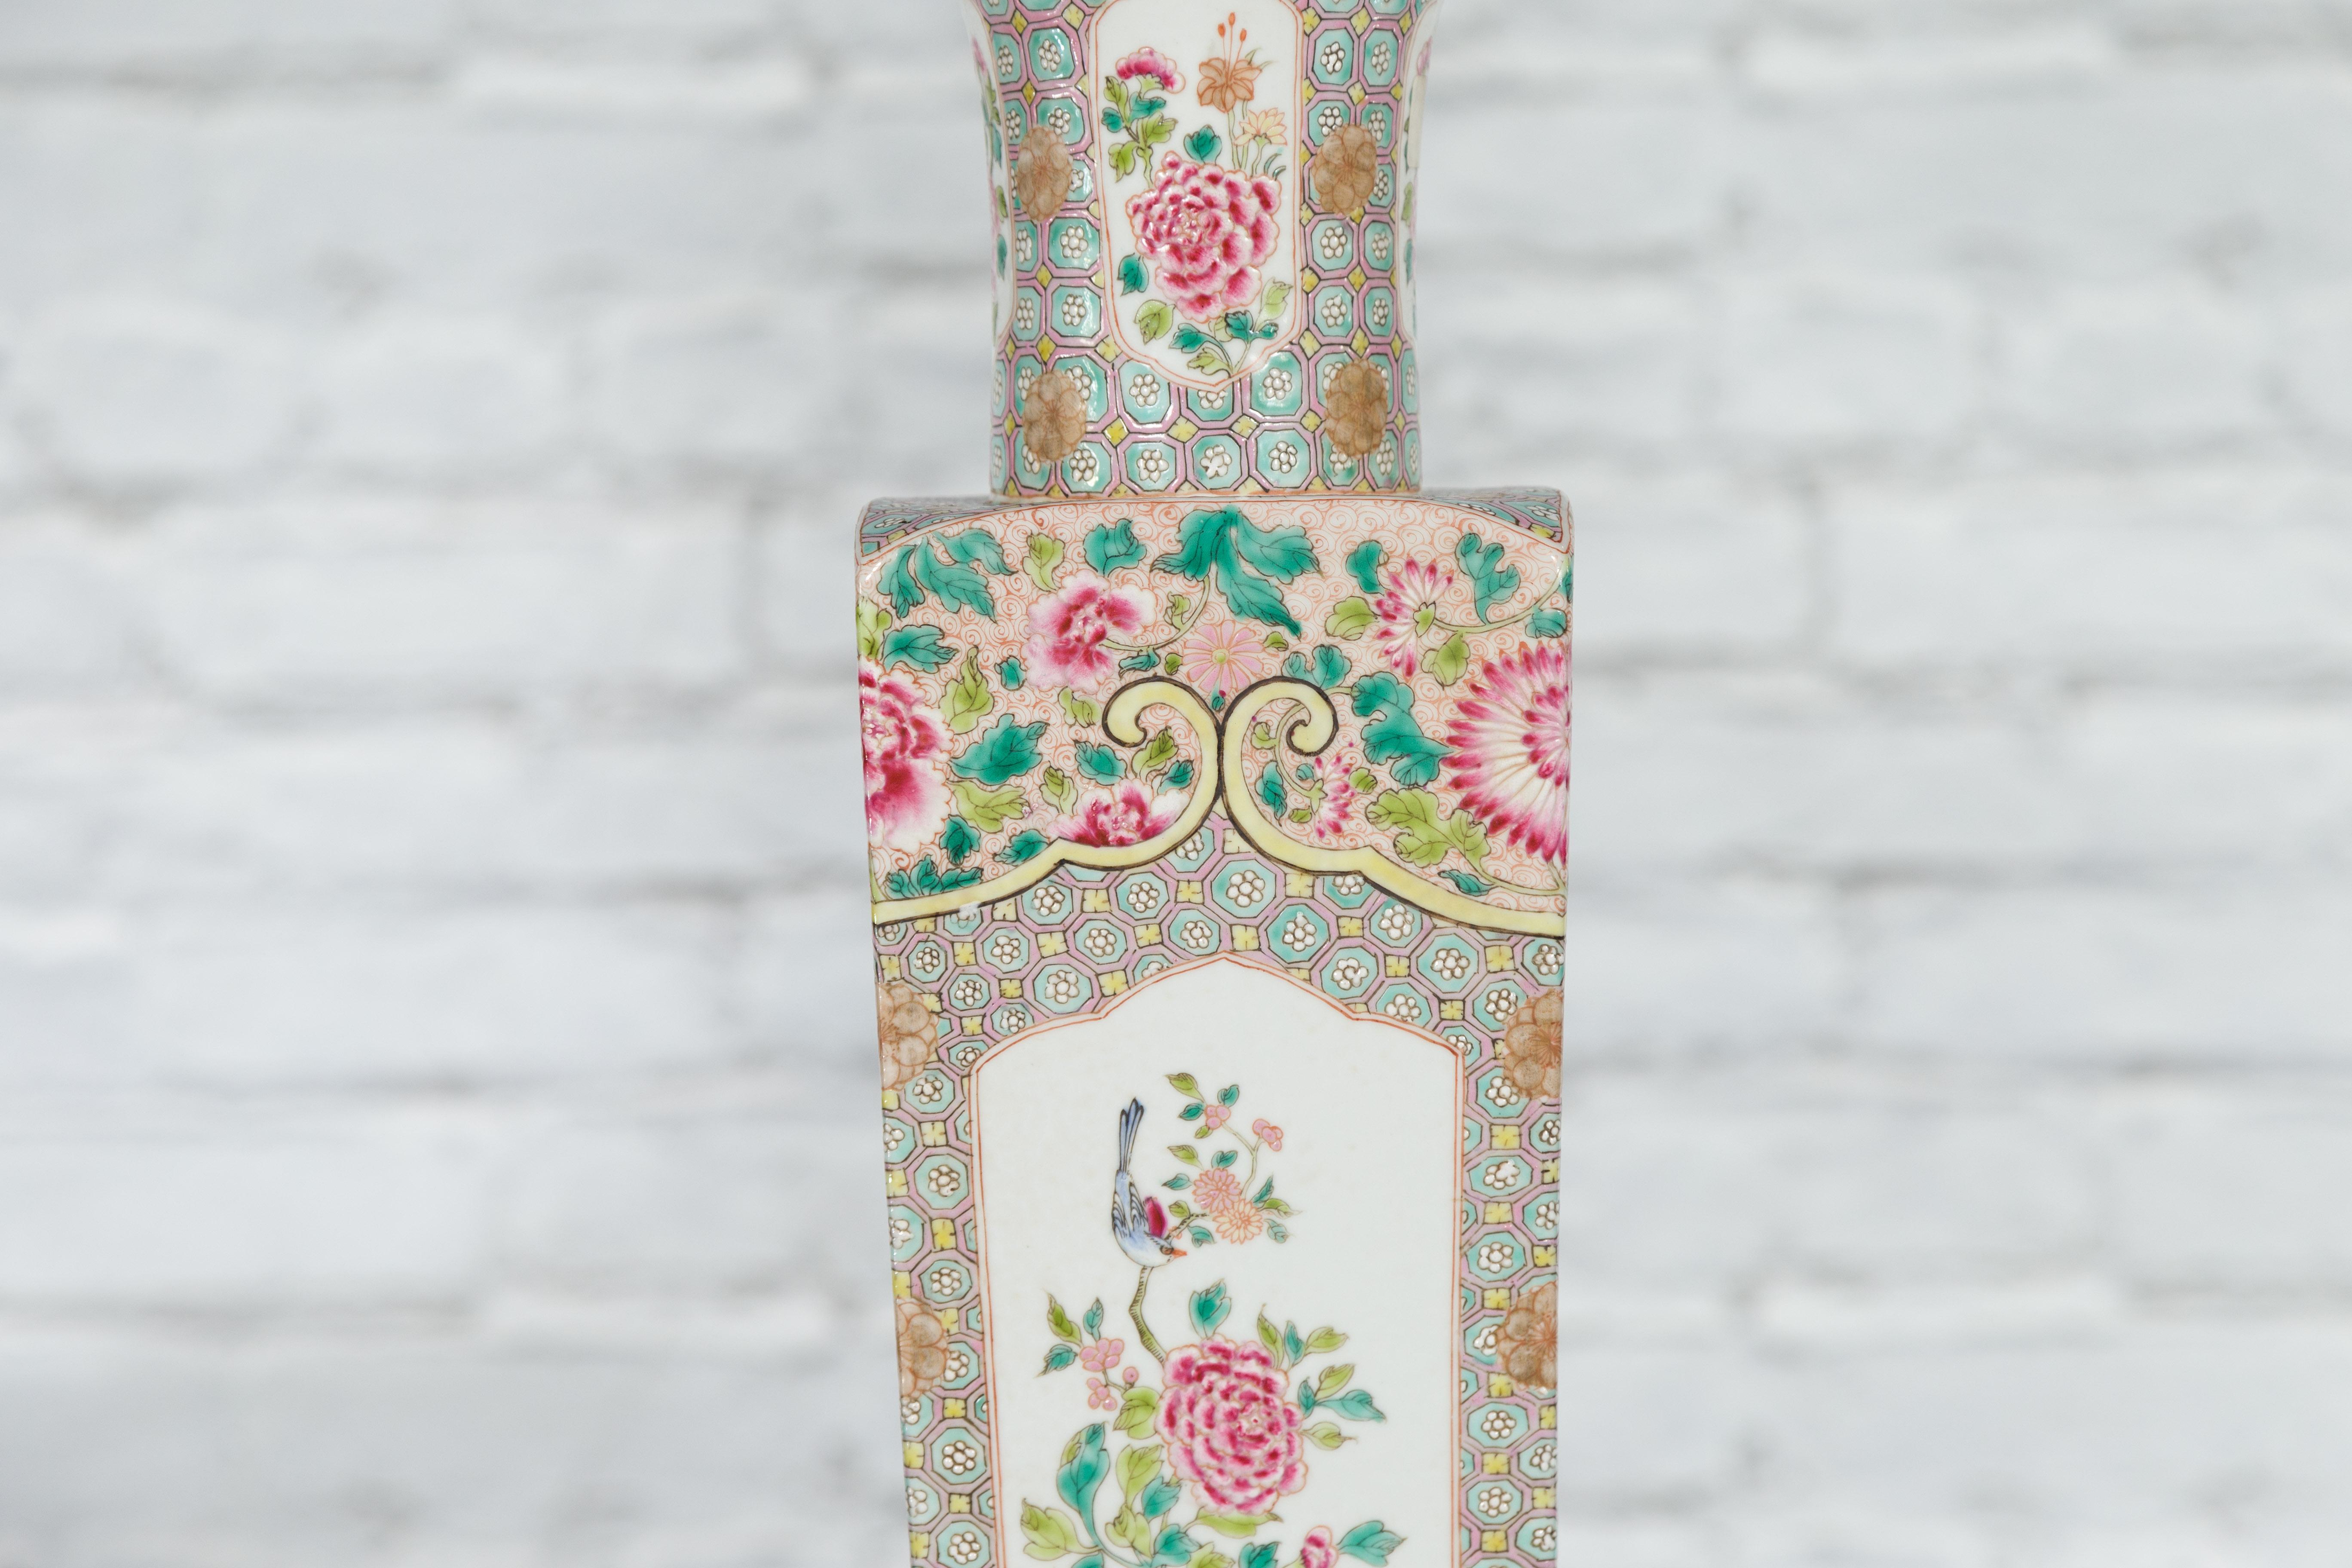 Ceramic Vintage Chinese Square Shaped Vase with Pink Flowers, Green Foliage and Birds For Sale